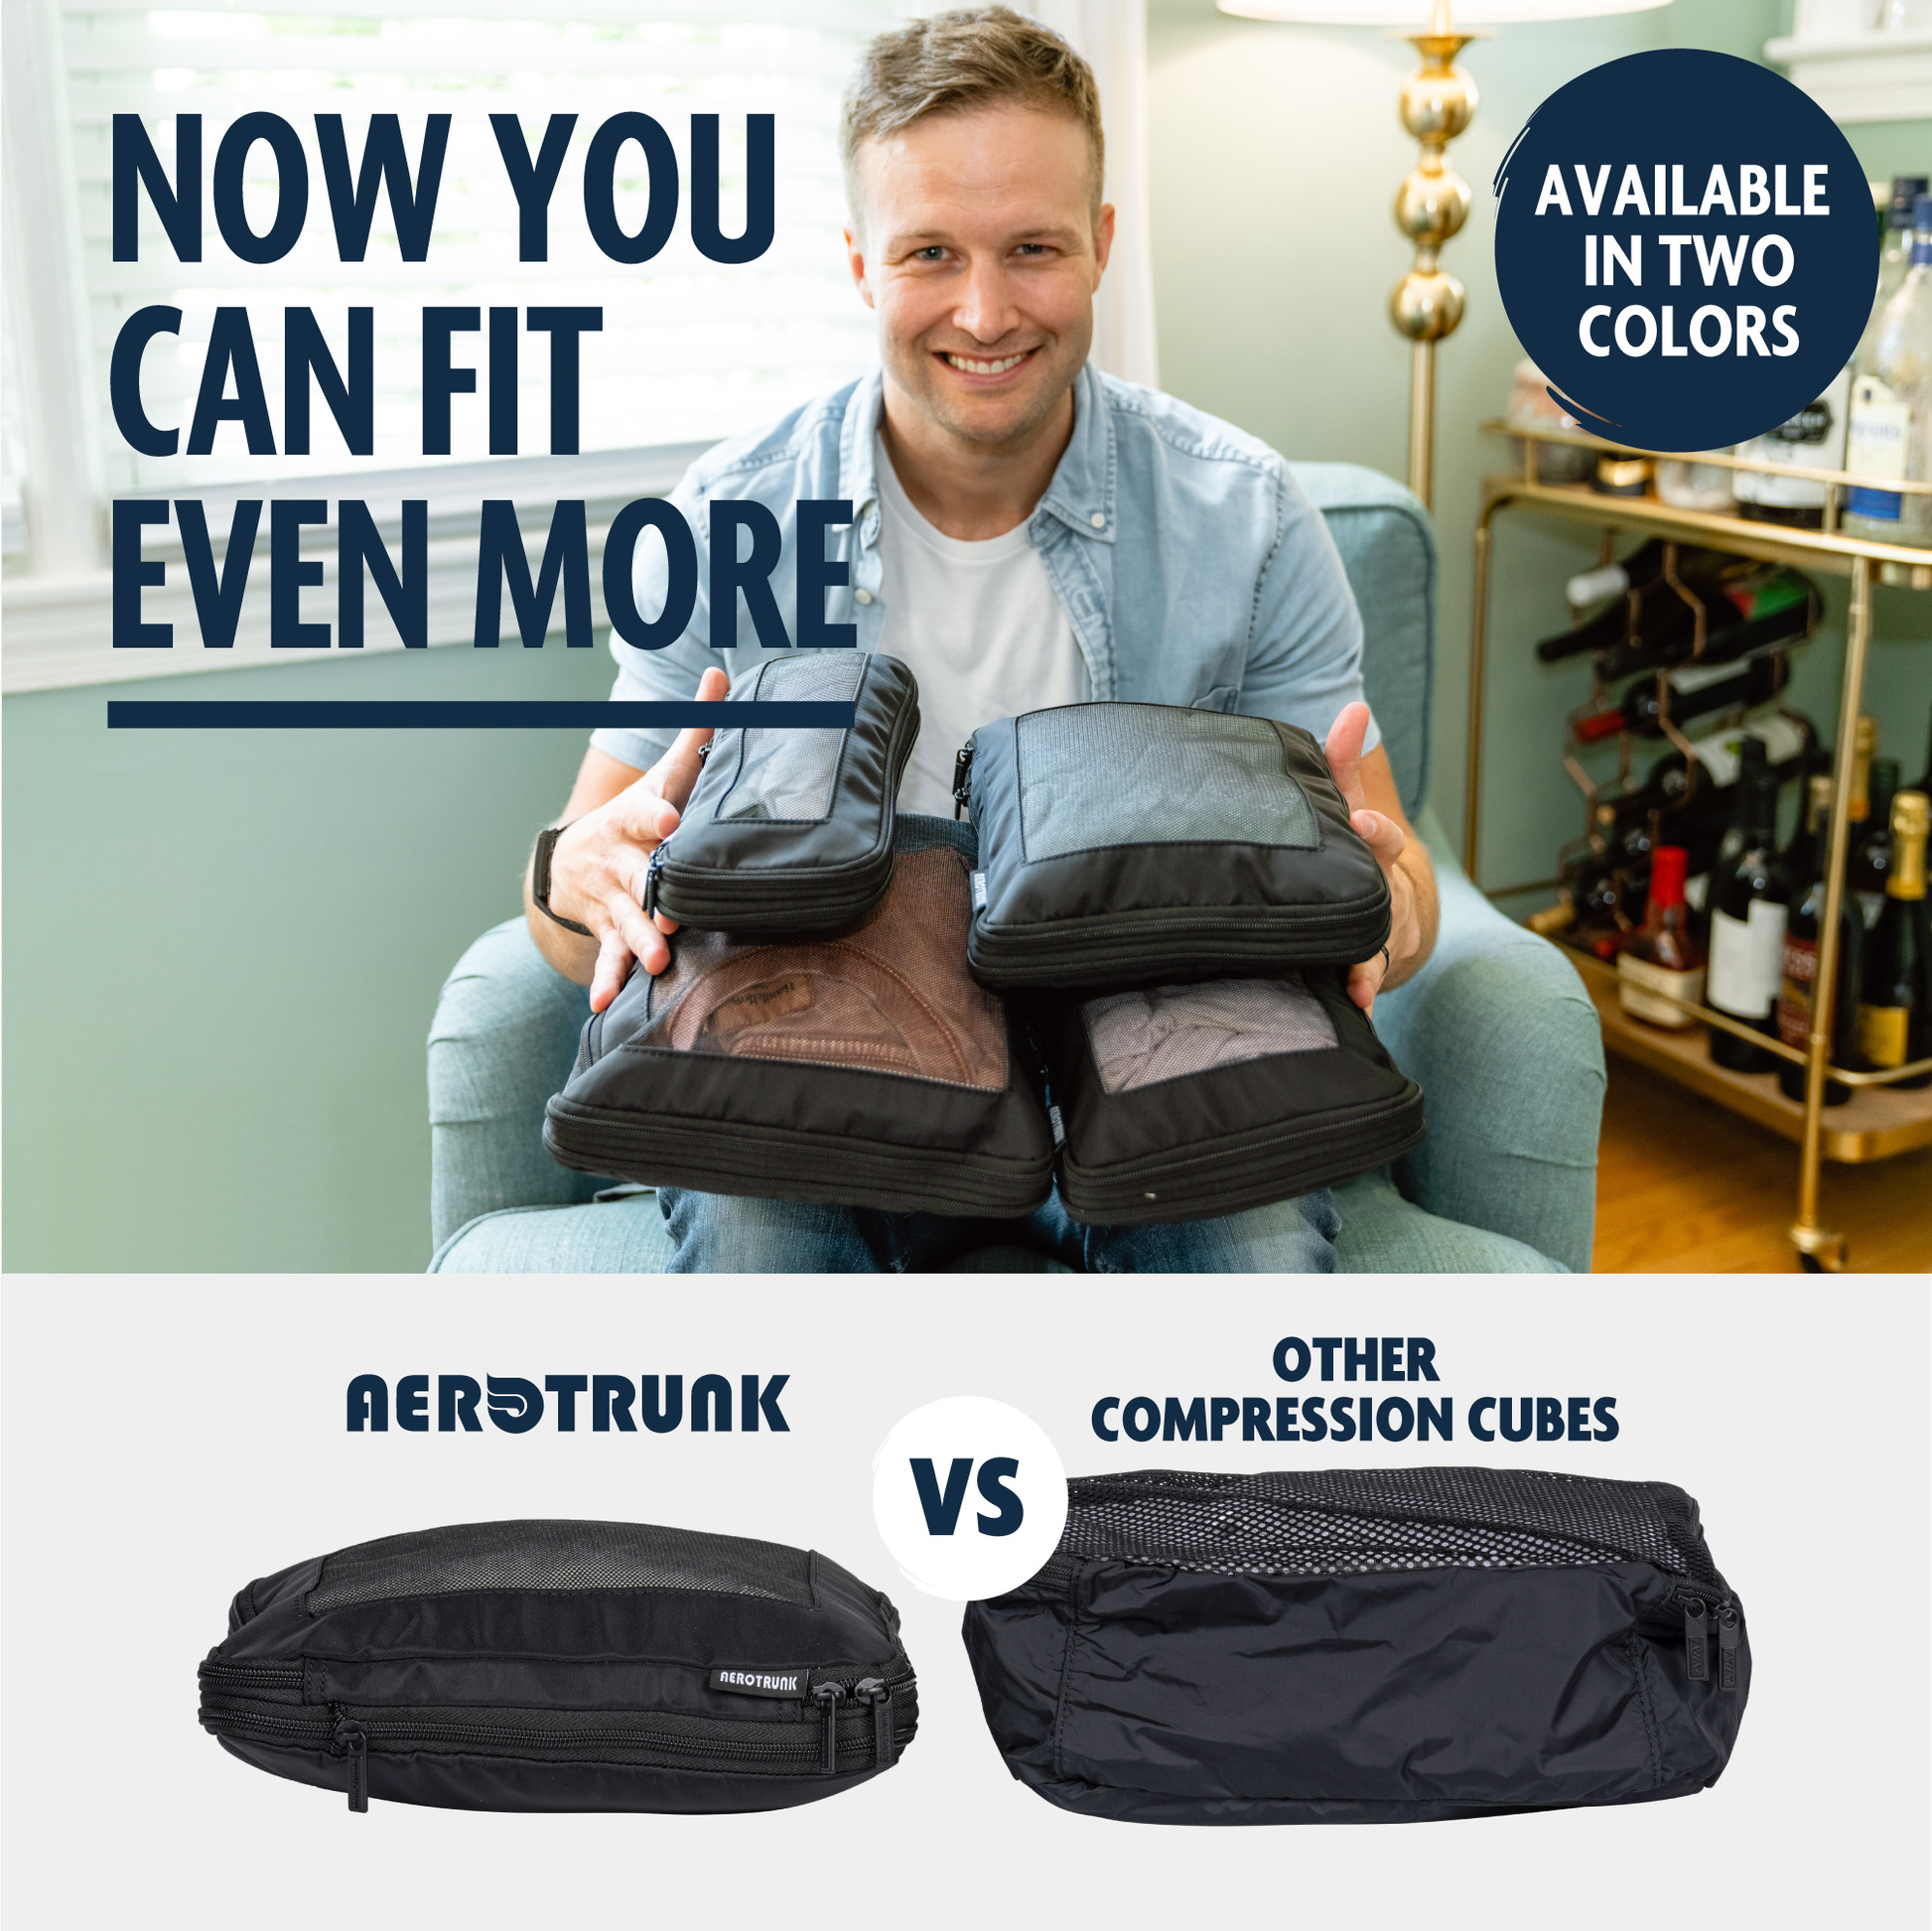 What's Better Than Compression Bags And Packing Cubes? Compression